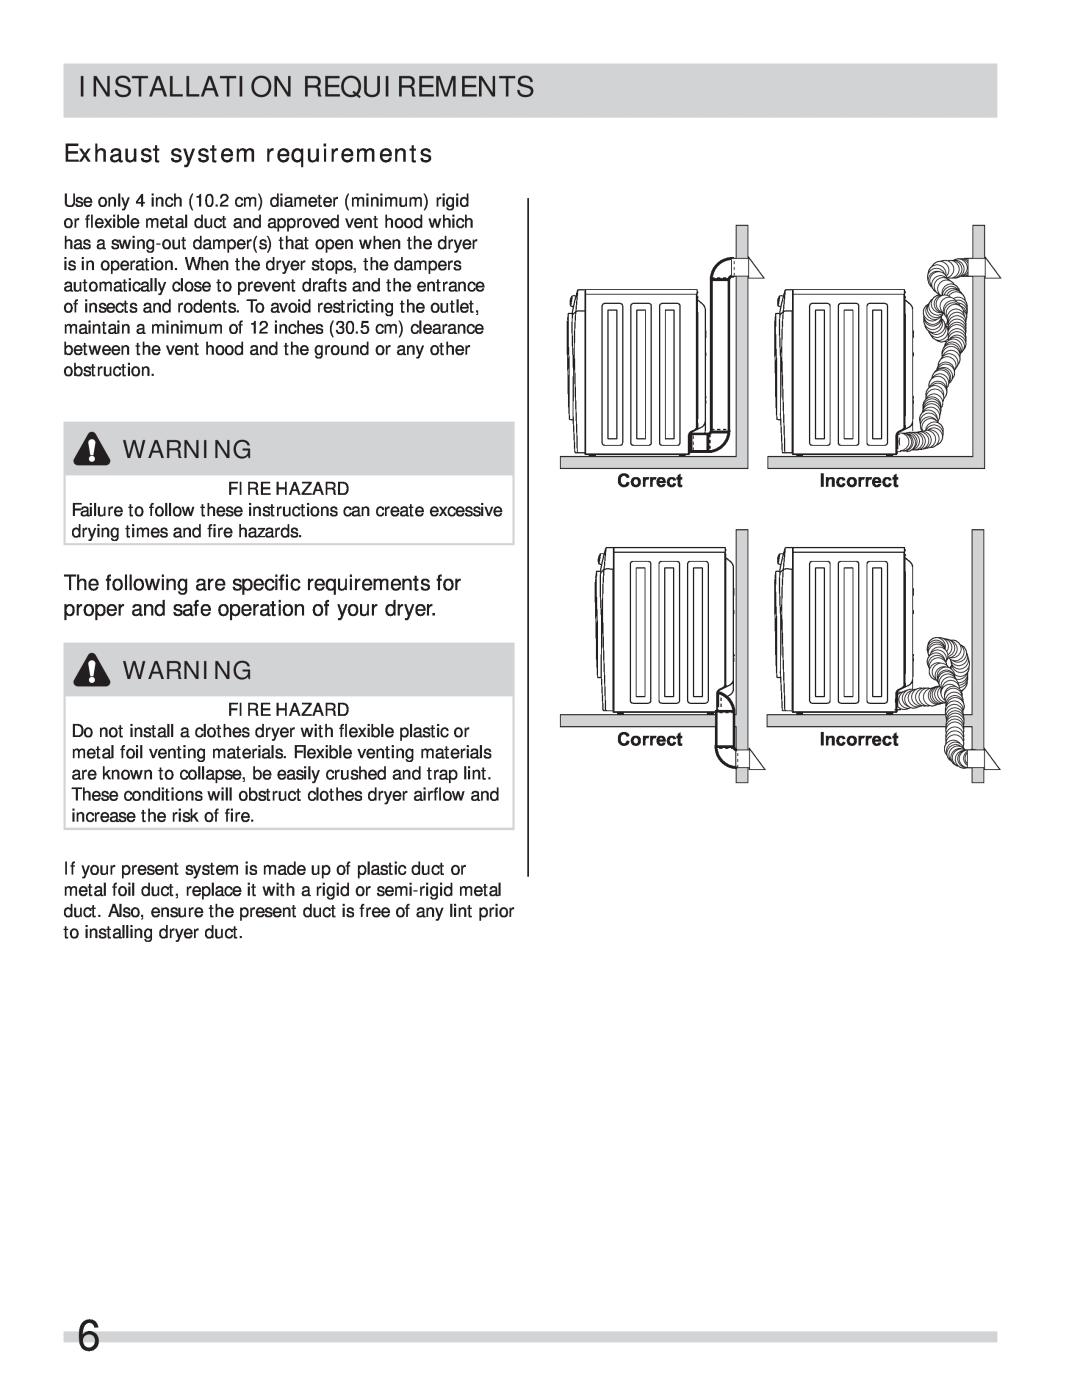 Frigidaire 137134900B Exhaust system requirements, Correct, Incorrect Incorrect, Fire Hazard, Installation Requirements 